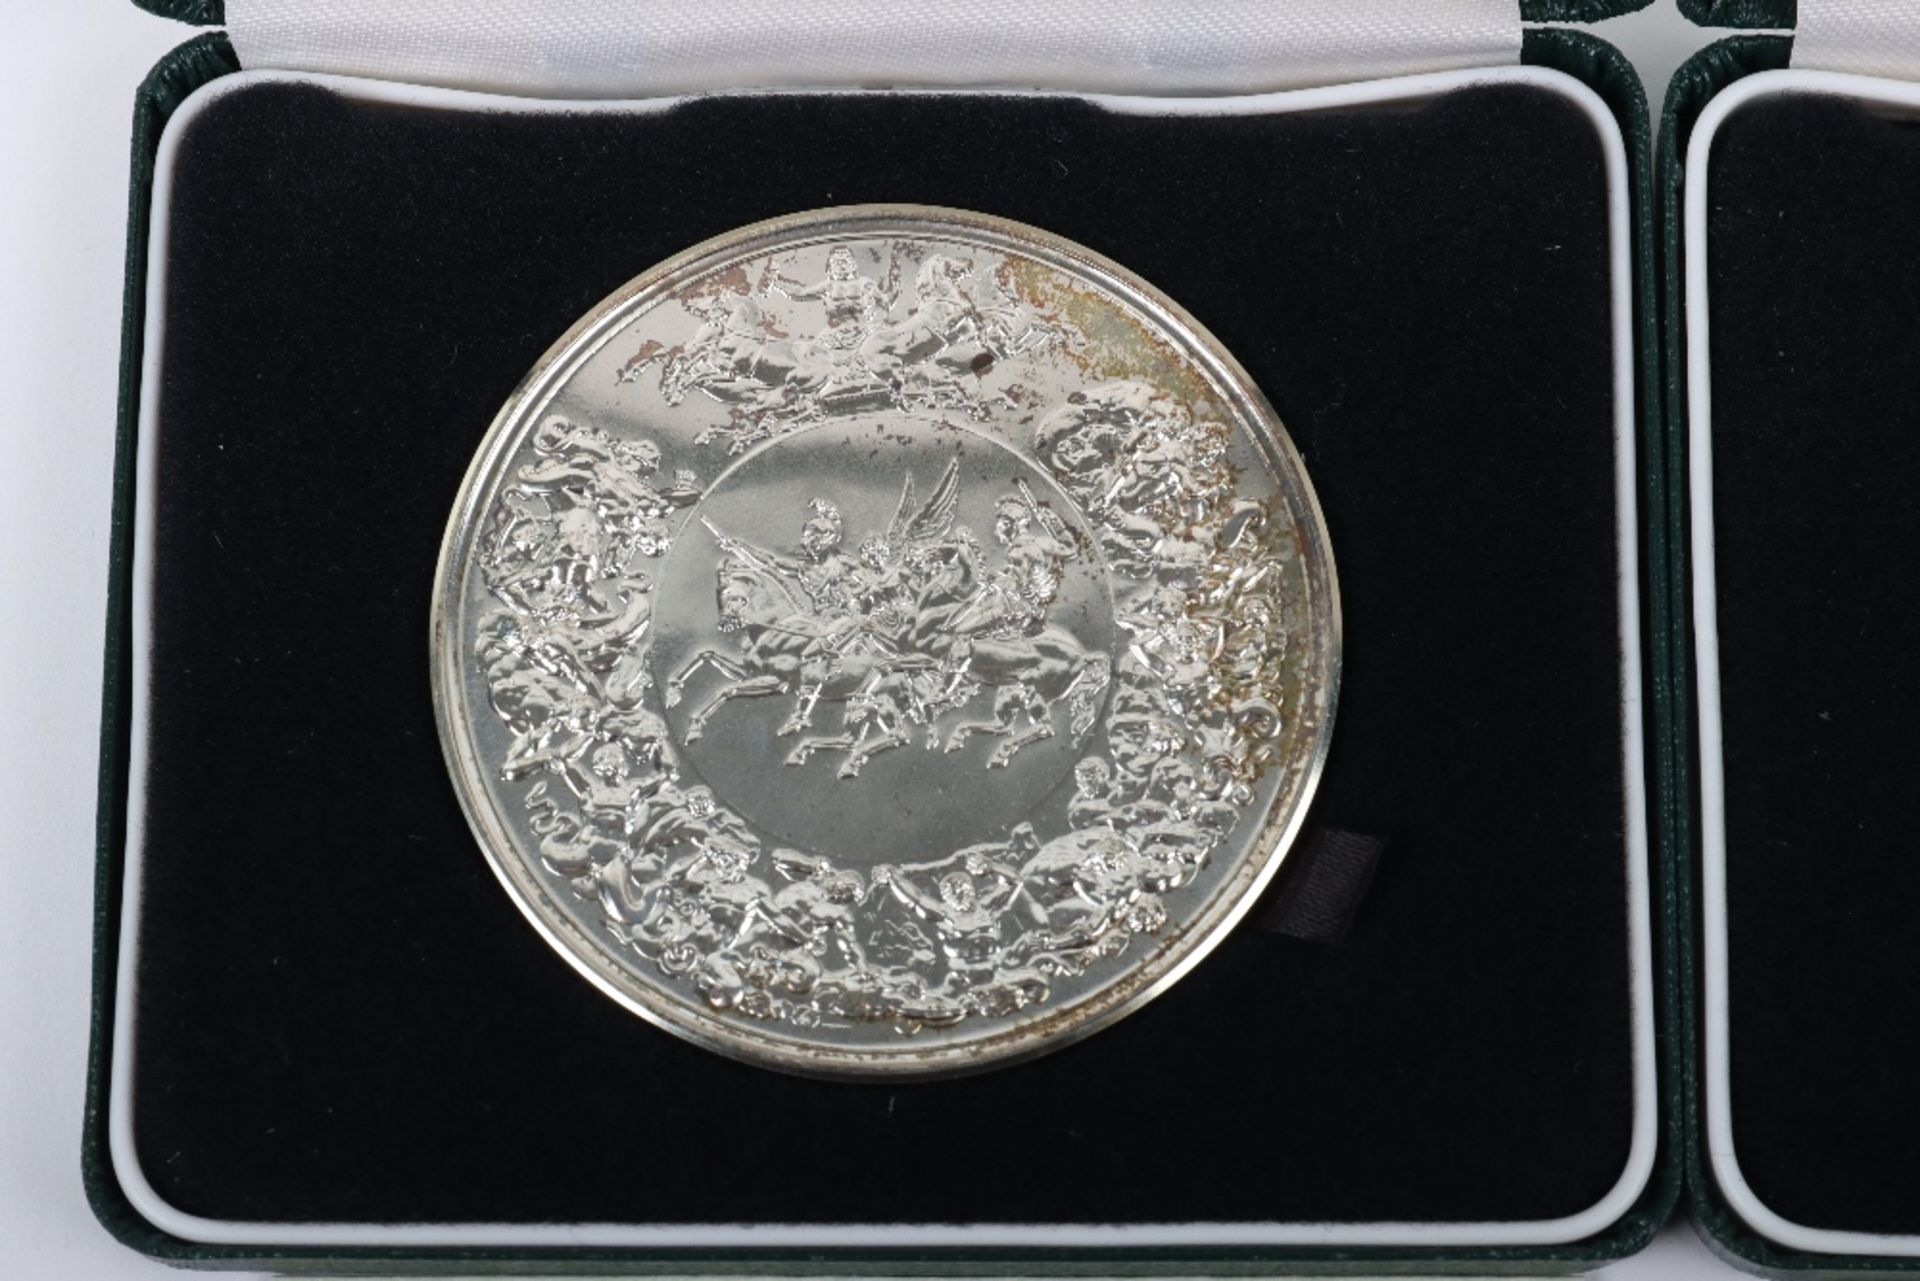 Two Battle of Waterloo 1990 Commemorative Silver medals - Image 2 of 4